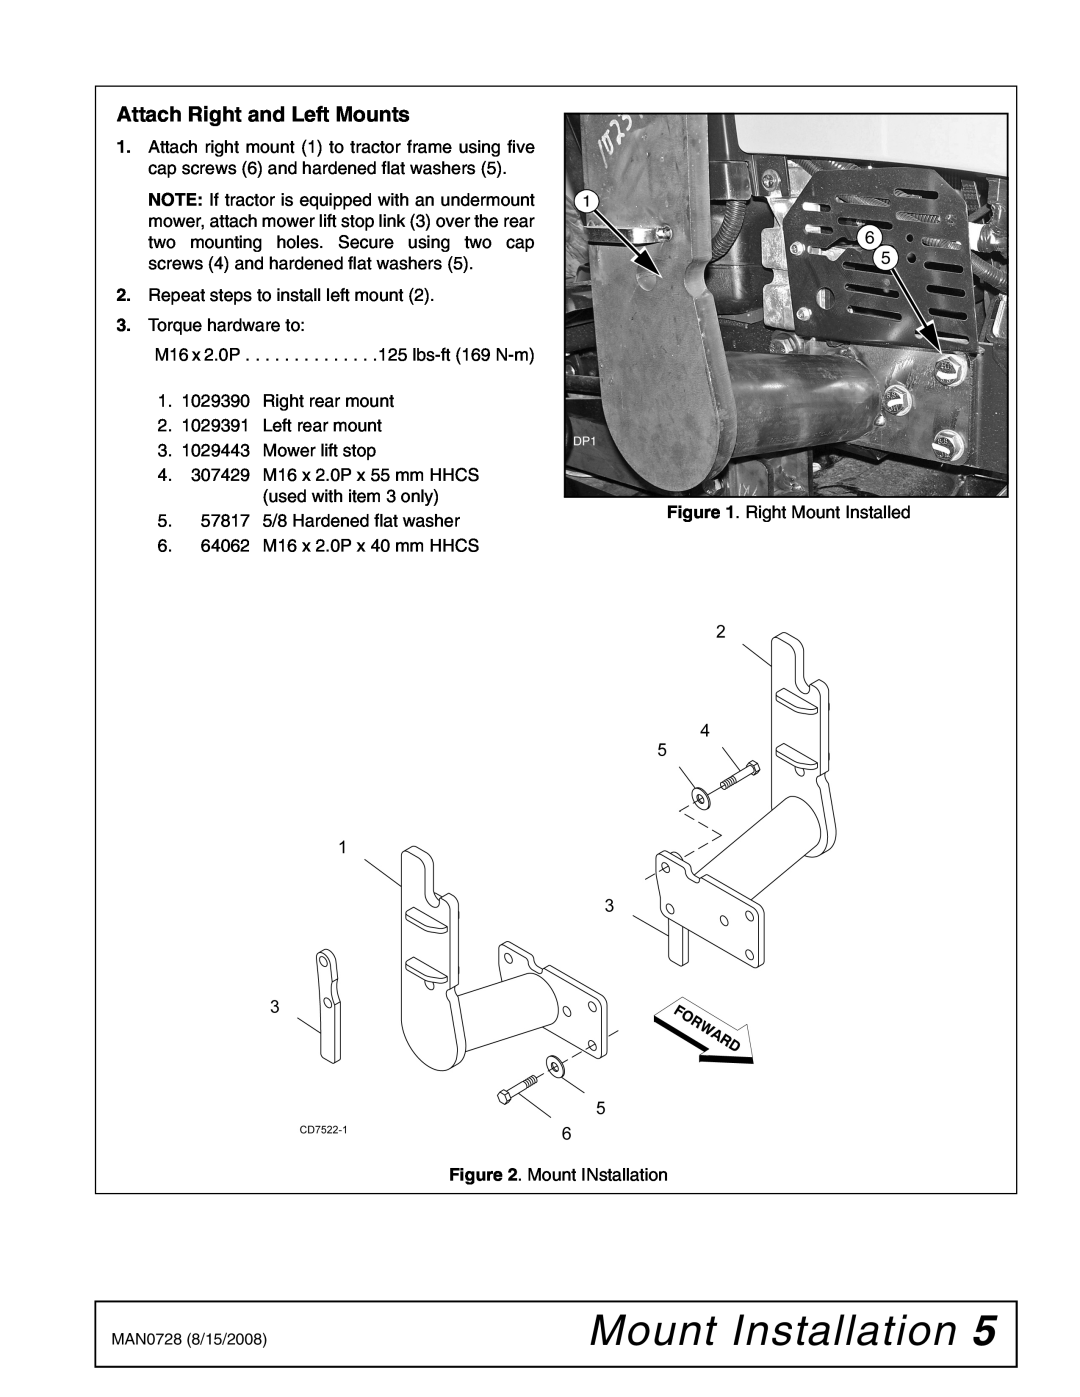 Woods Equipment 2100042 installation manual Mount Installation, Attach Right and Left Mounts 